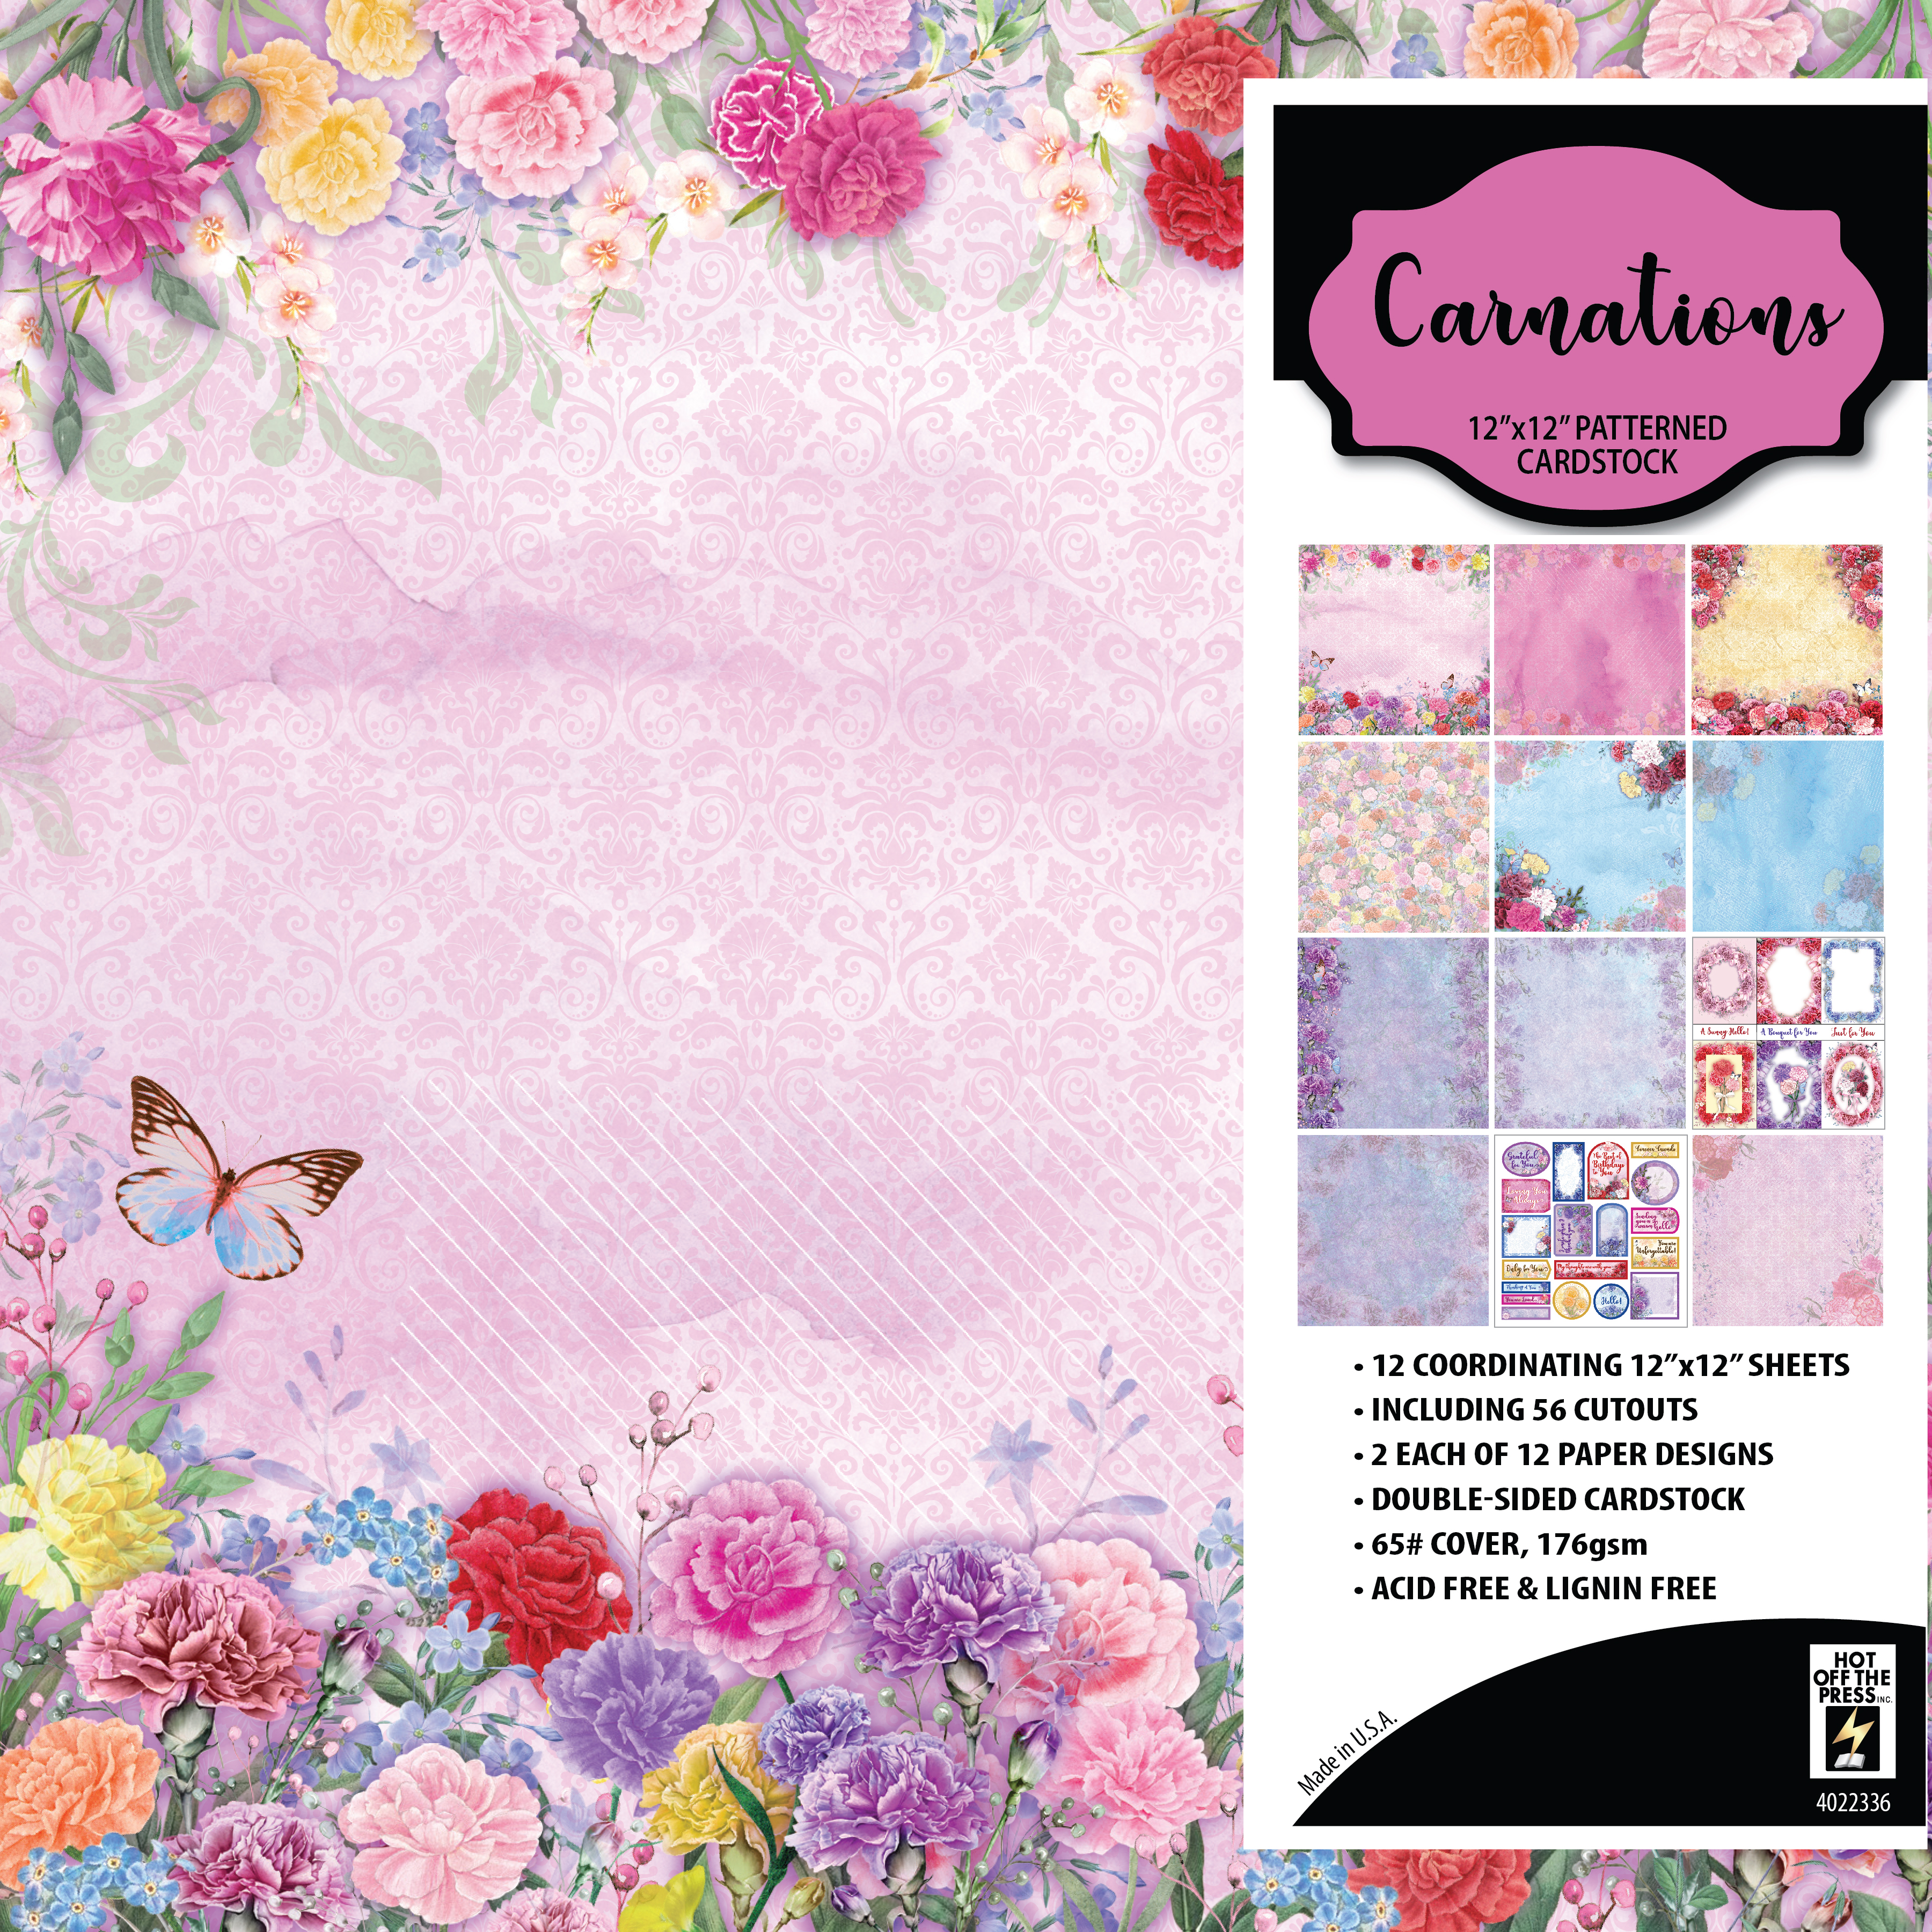 Carnations 12x12 Patterned Cardstock